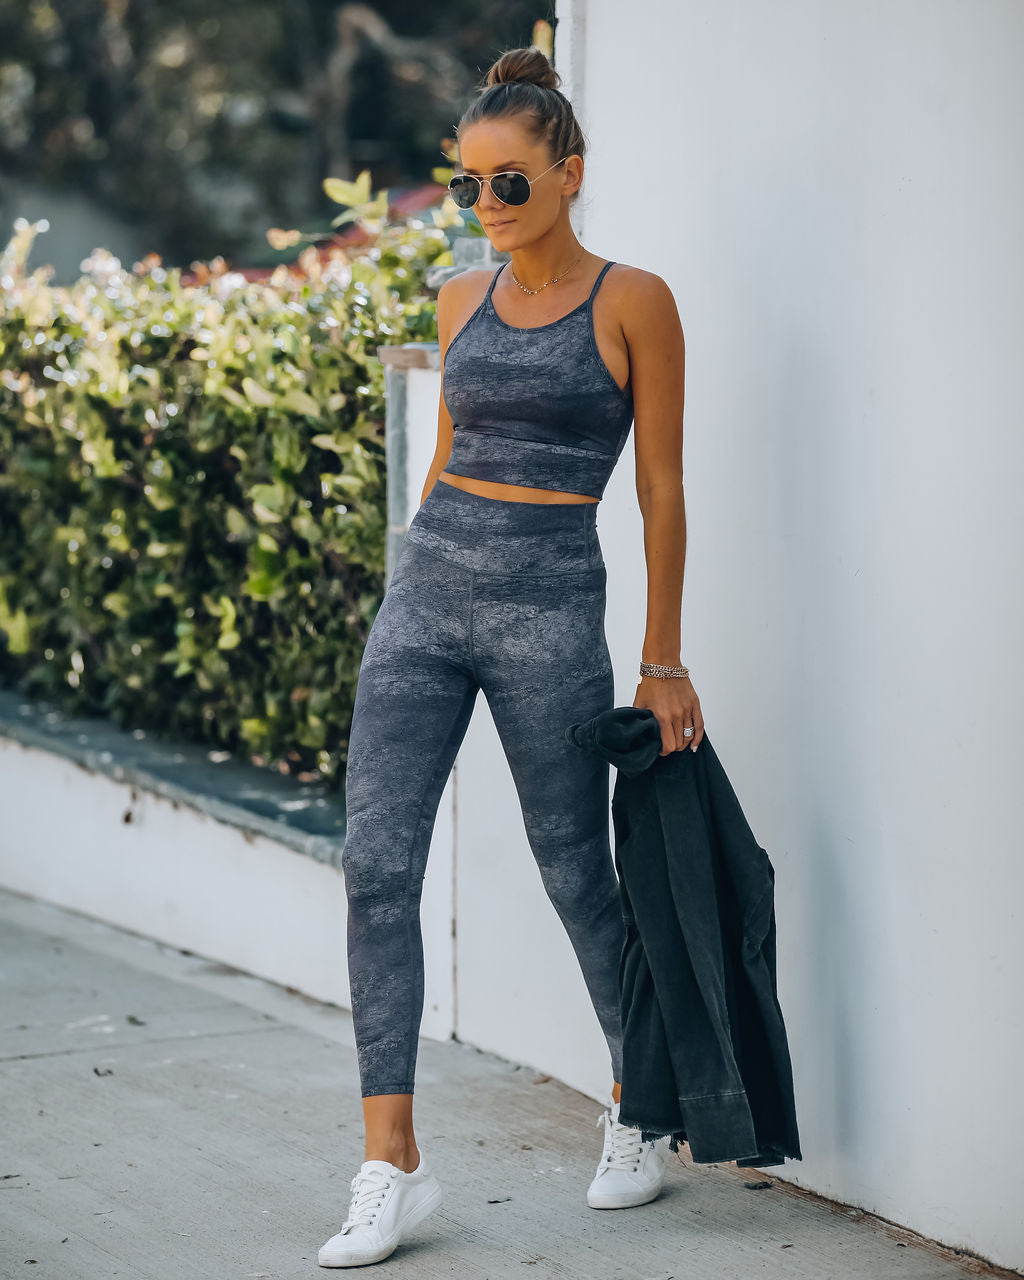 Rise And Grind Legging Ins Street